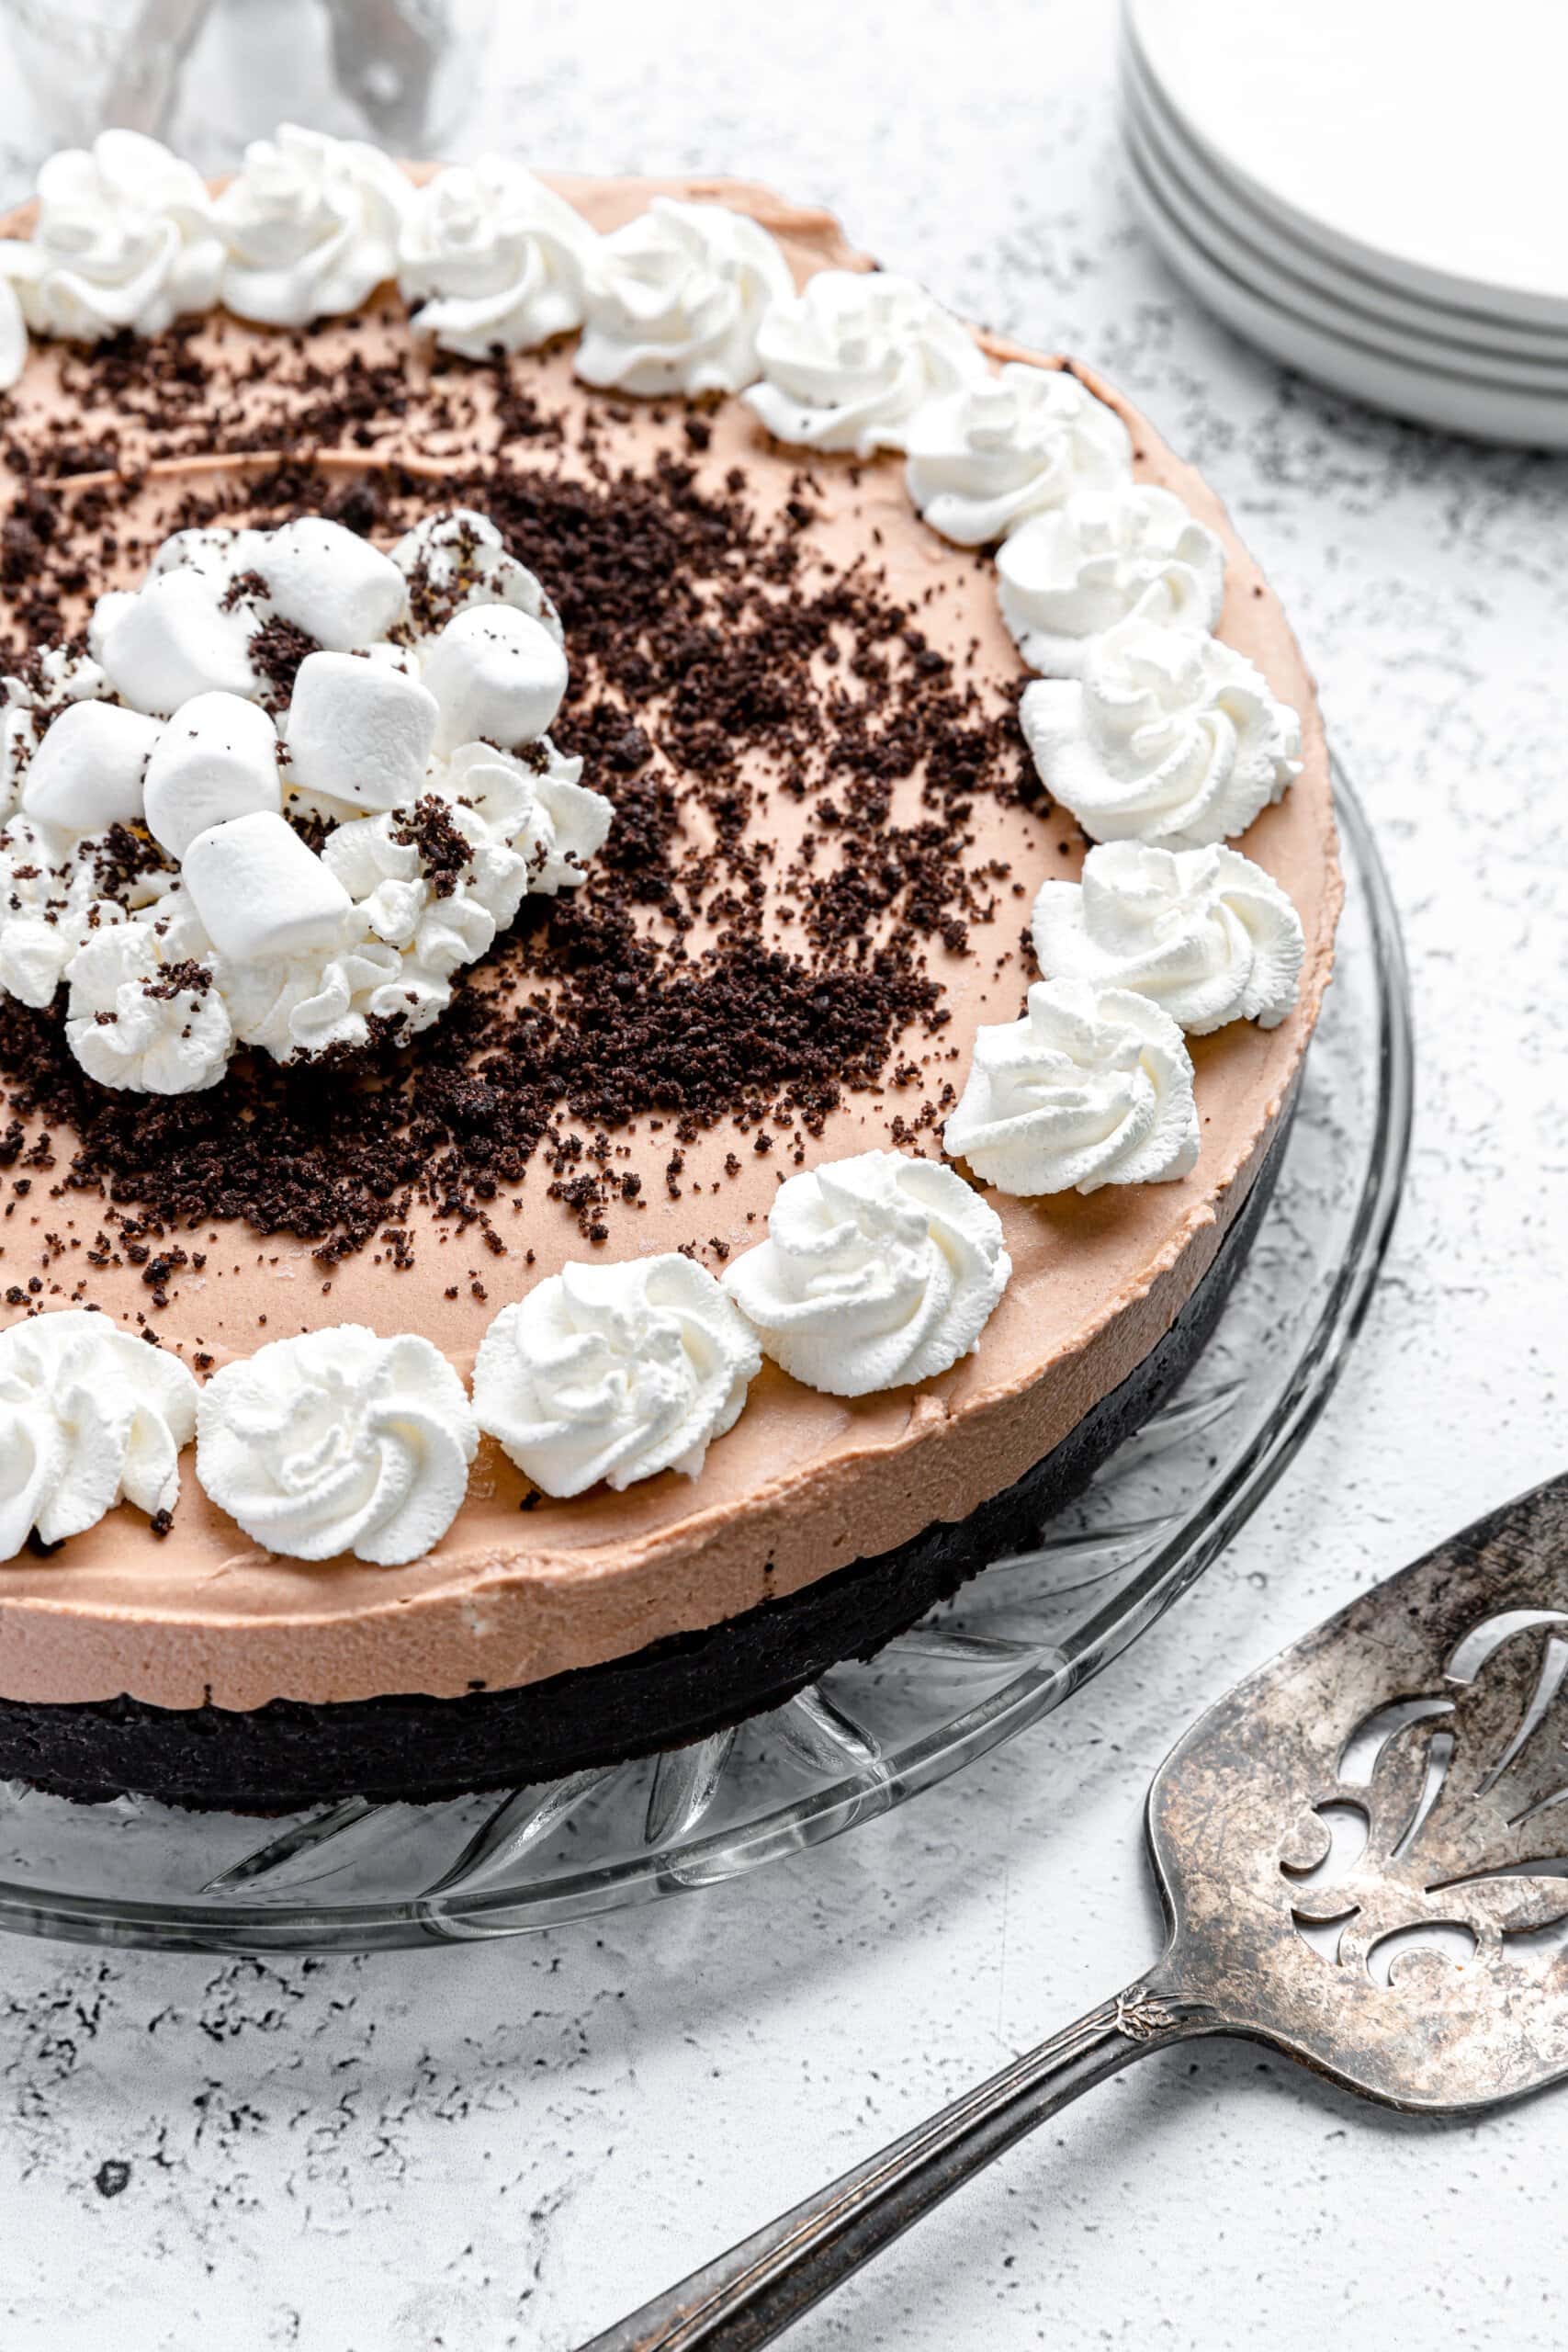 A no bake chocolate pie with whipped cream and an Oreo crust